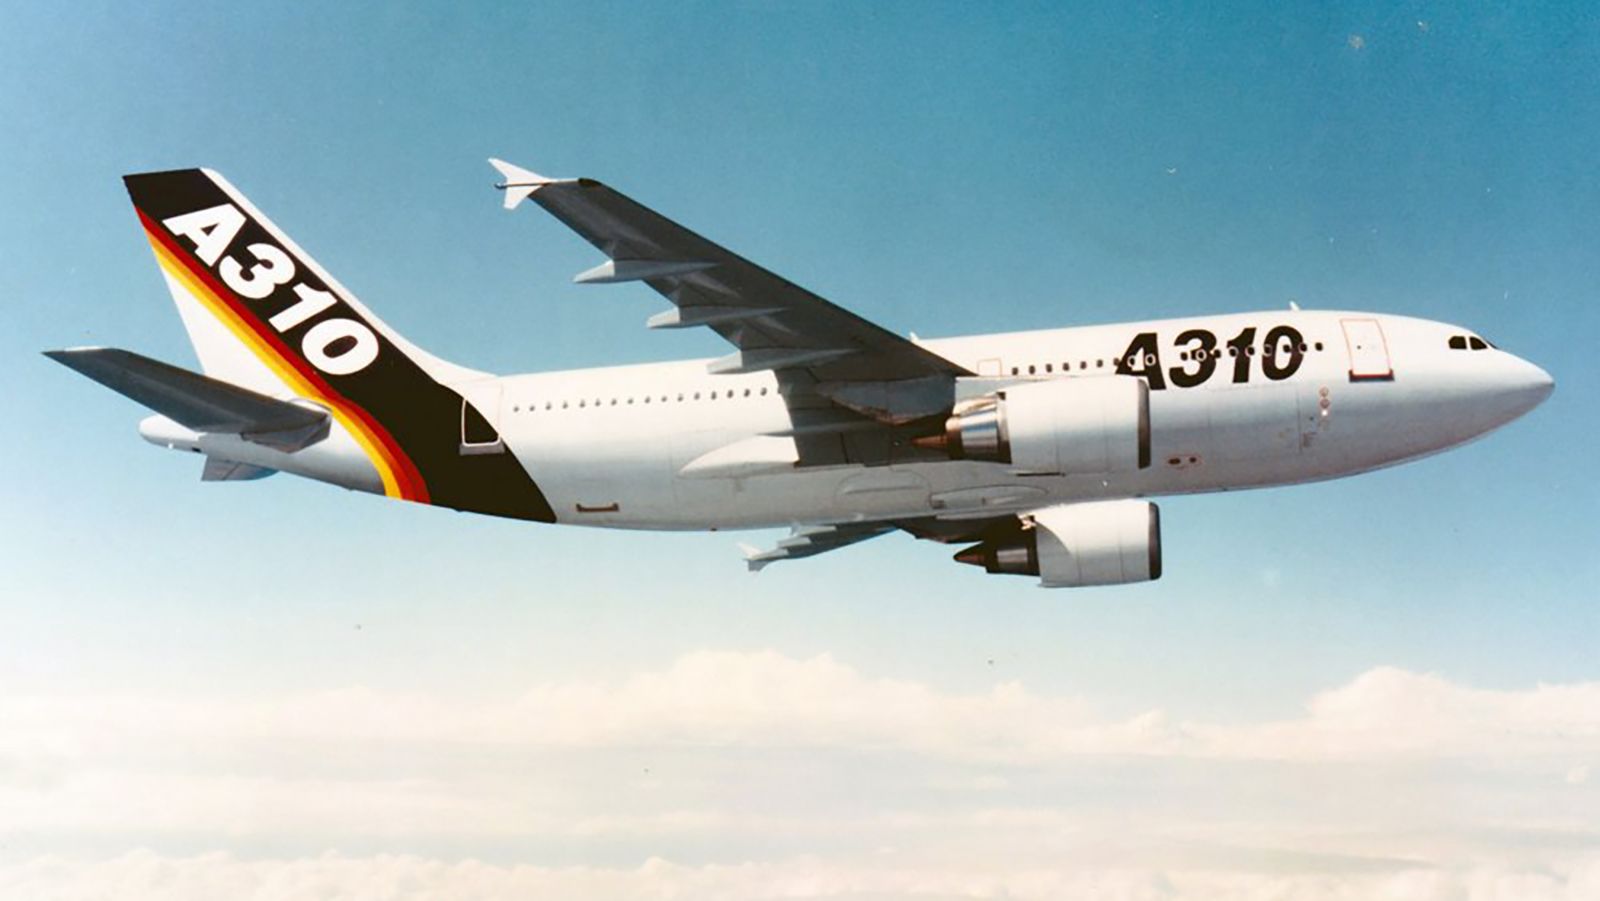 Airbus A300: Plane that launched an empire